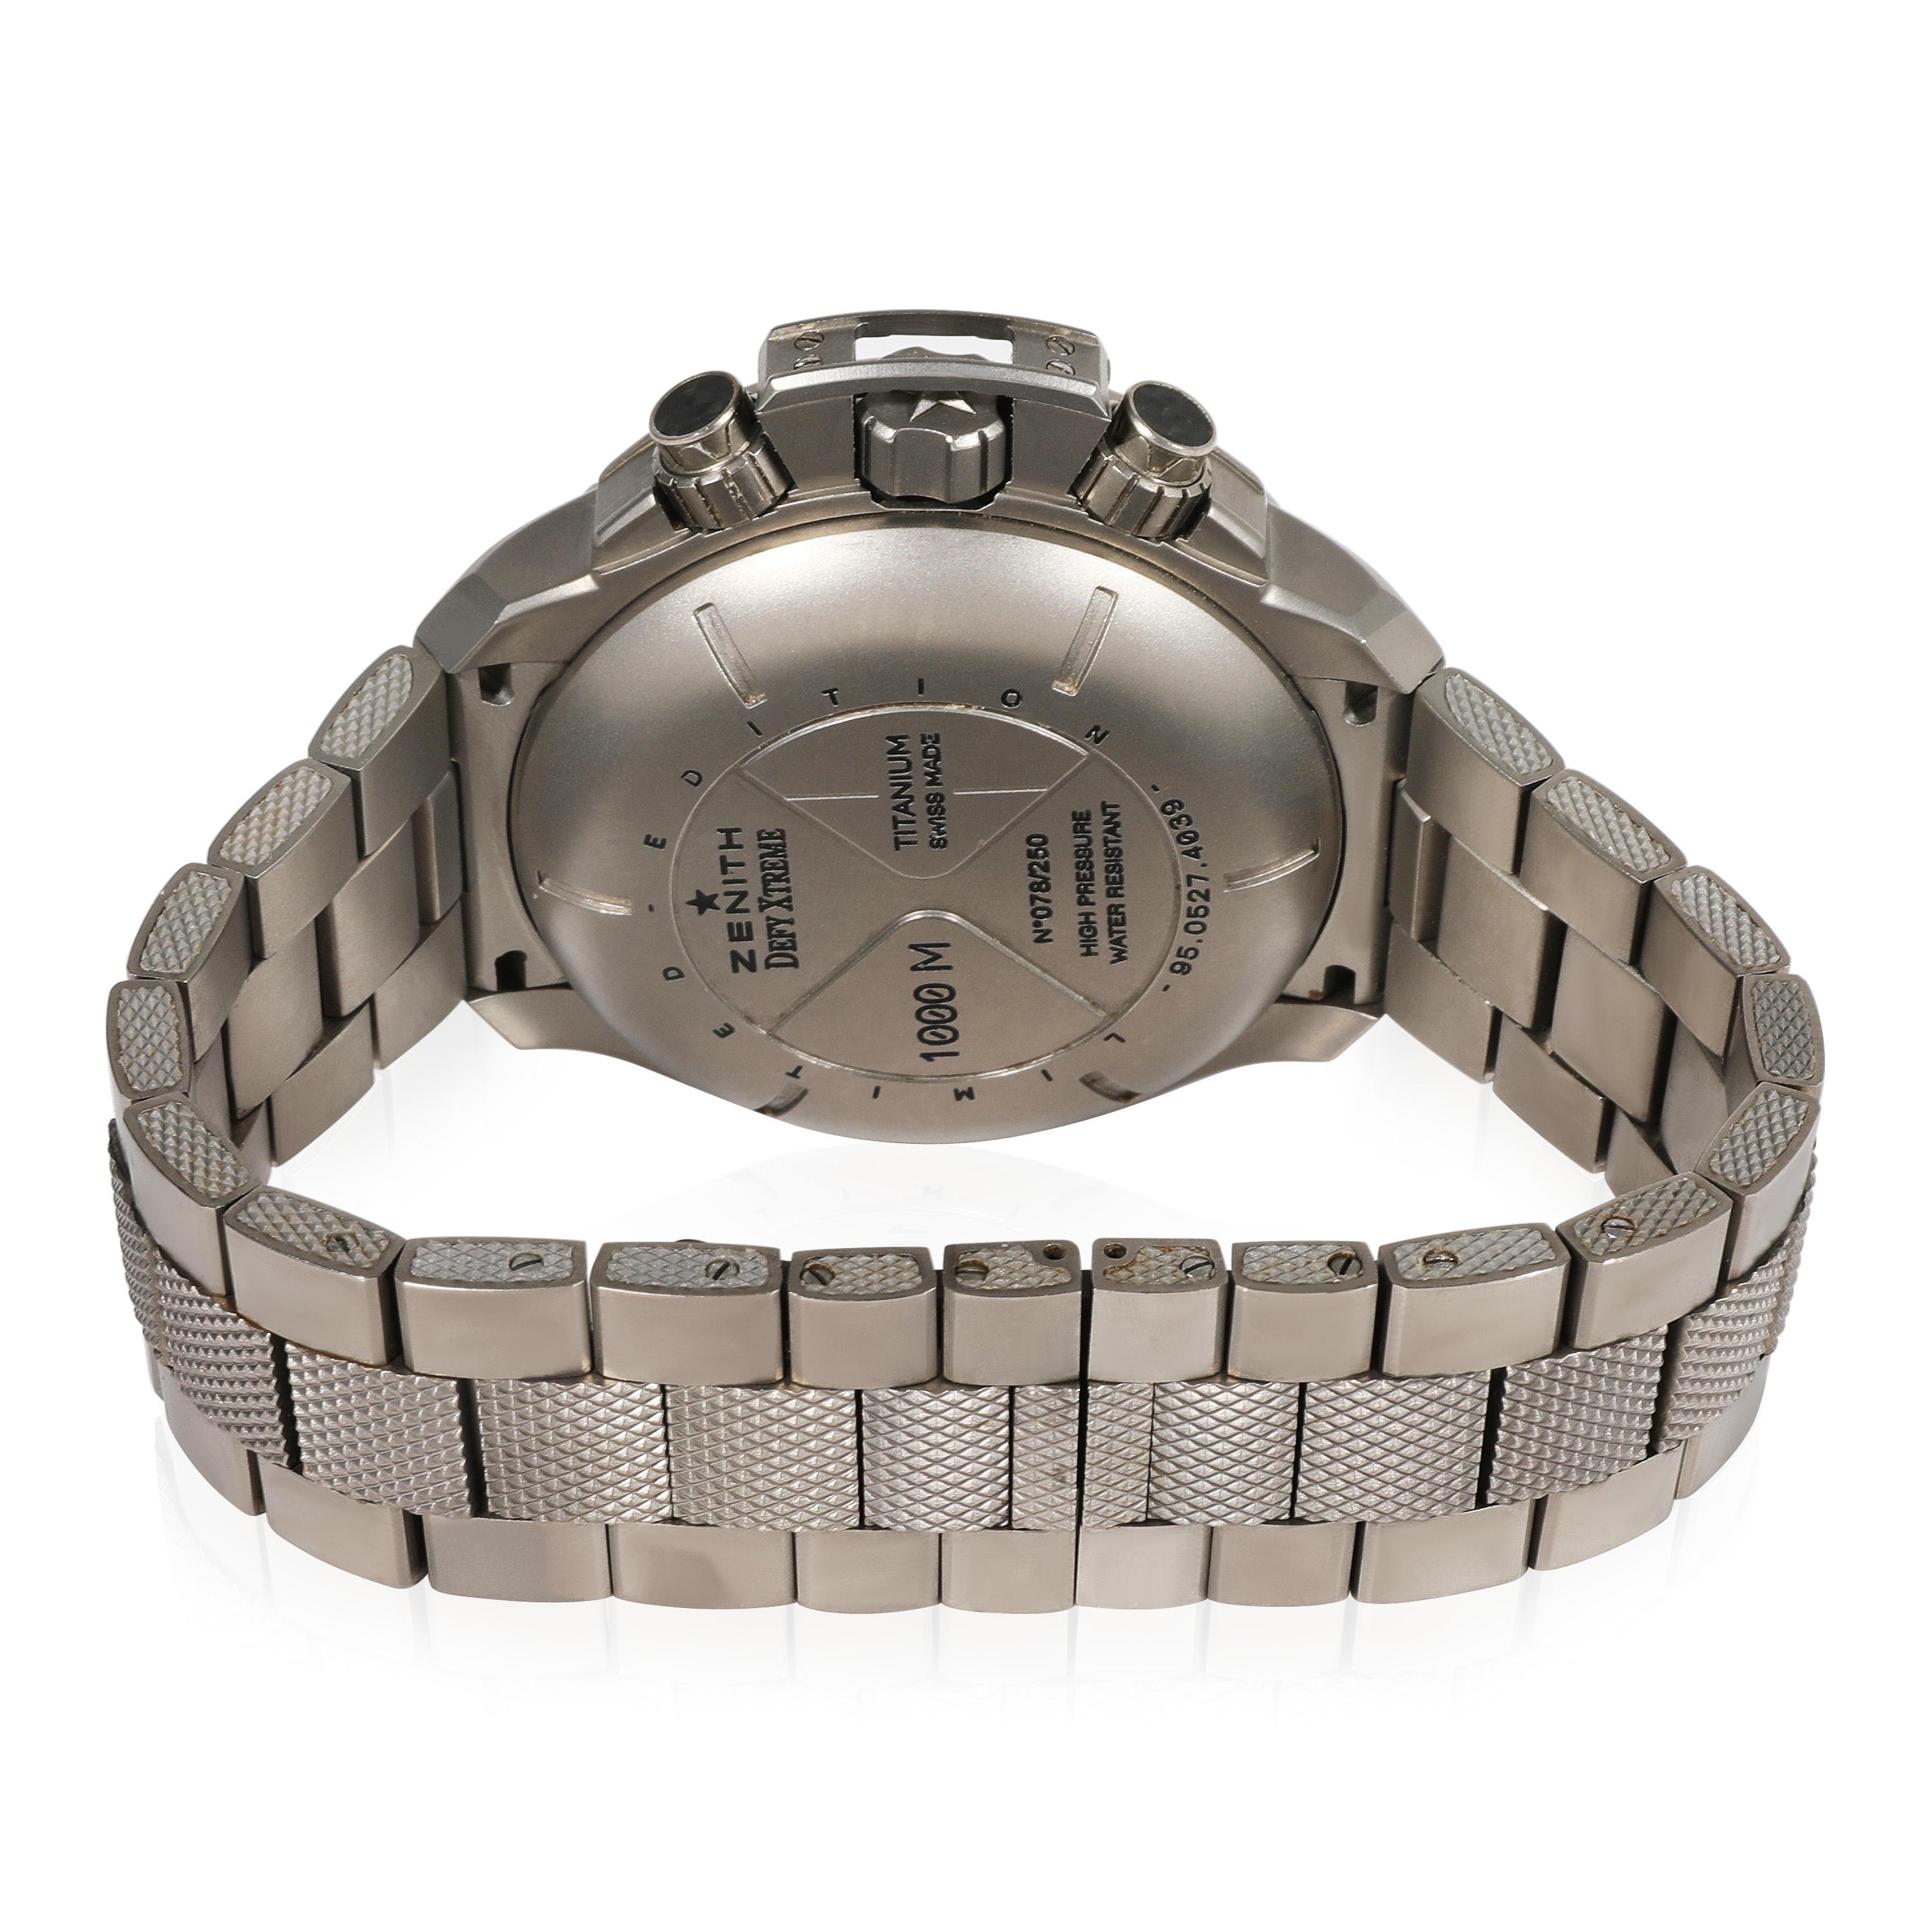 Zenith Defy Extreme 95.0527.4039 Men's Watch in  Titanium

SKU: 121178

PRIMARY DETAILS
Brand: Zenith
Model: Defy Extreme
Country of Origin: Switzerland
Movement Type: Mechanical: Hand-winding
Year Manufactured: 2010
Year of Manufacture: